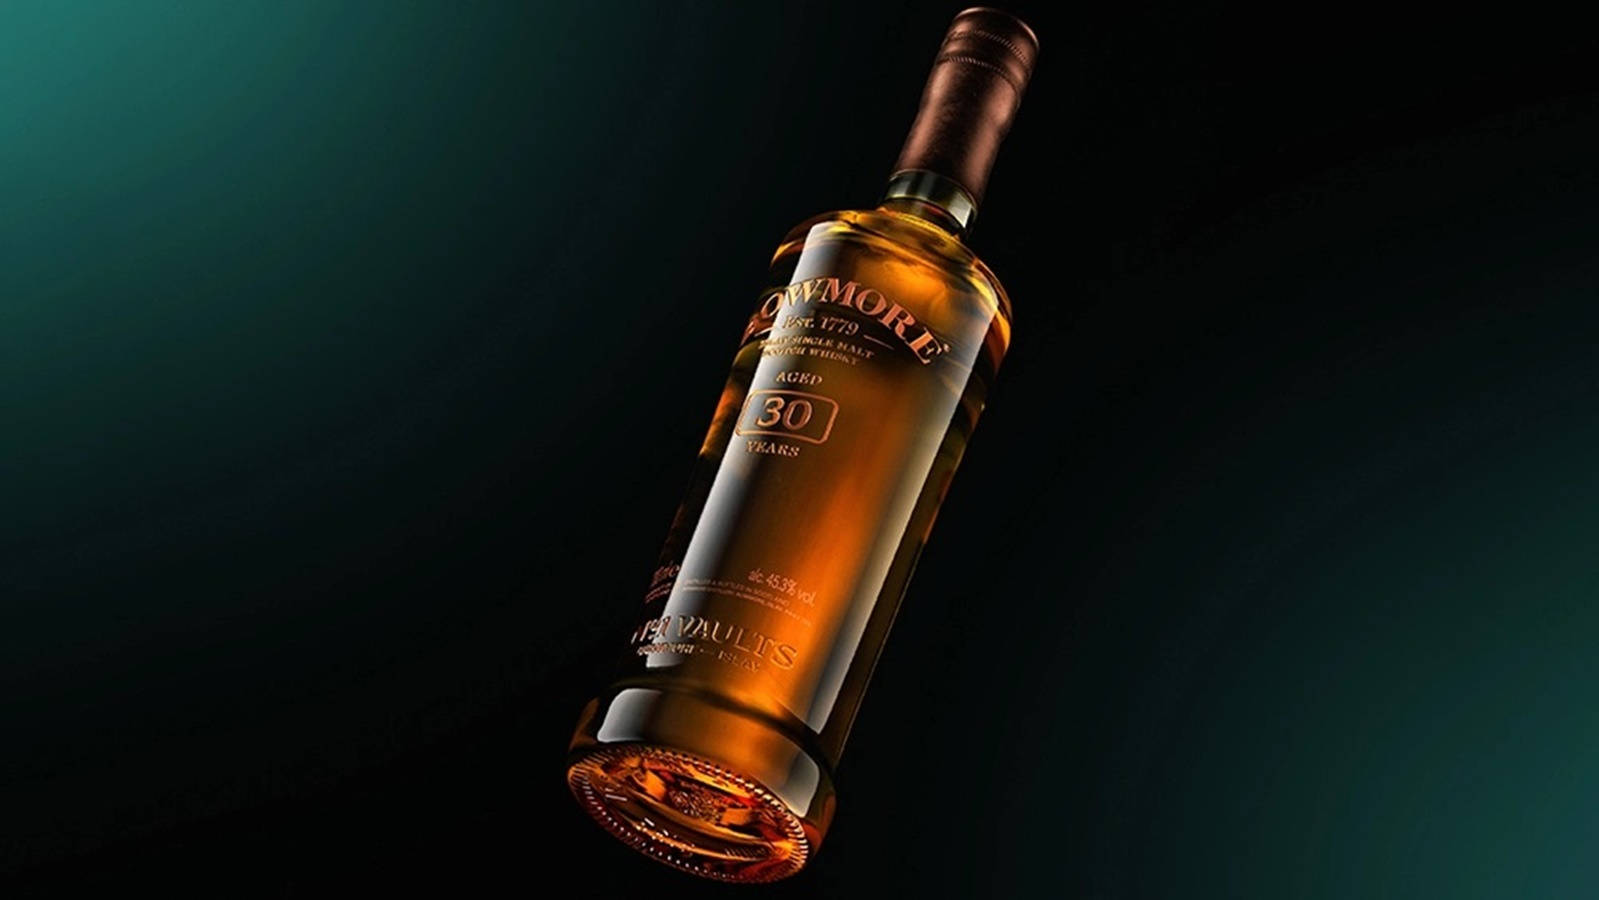 Bowmore 30 Years Old Wallpaper